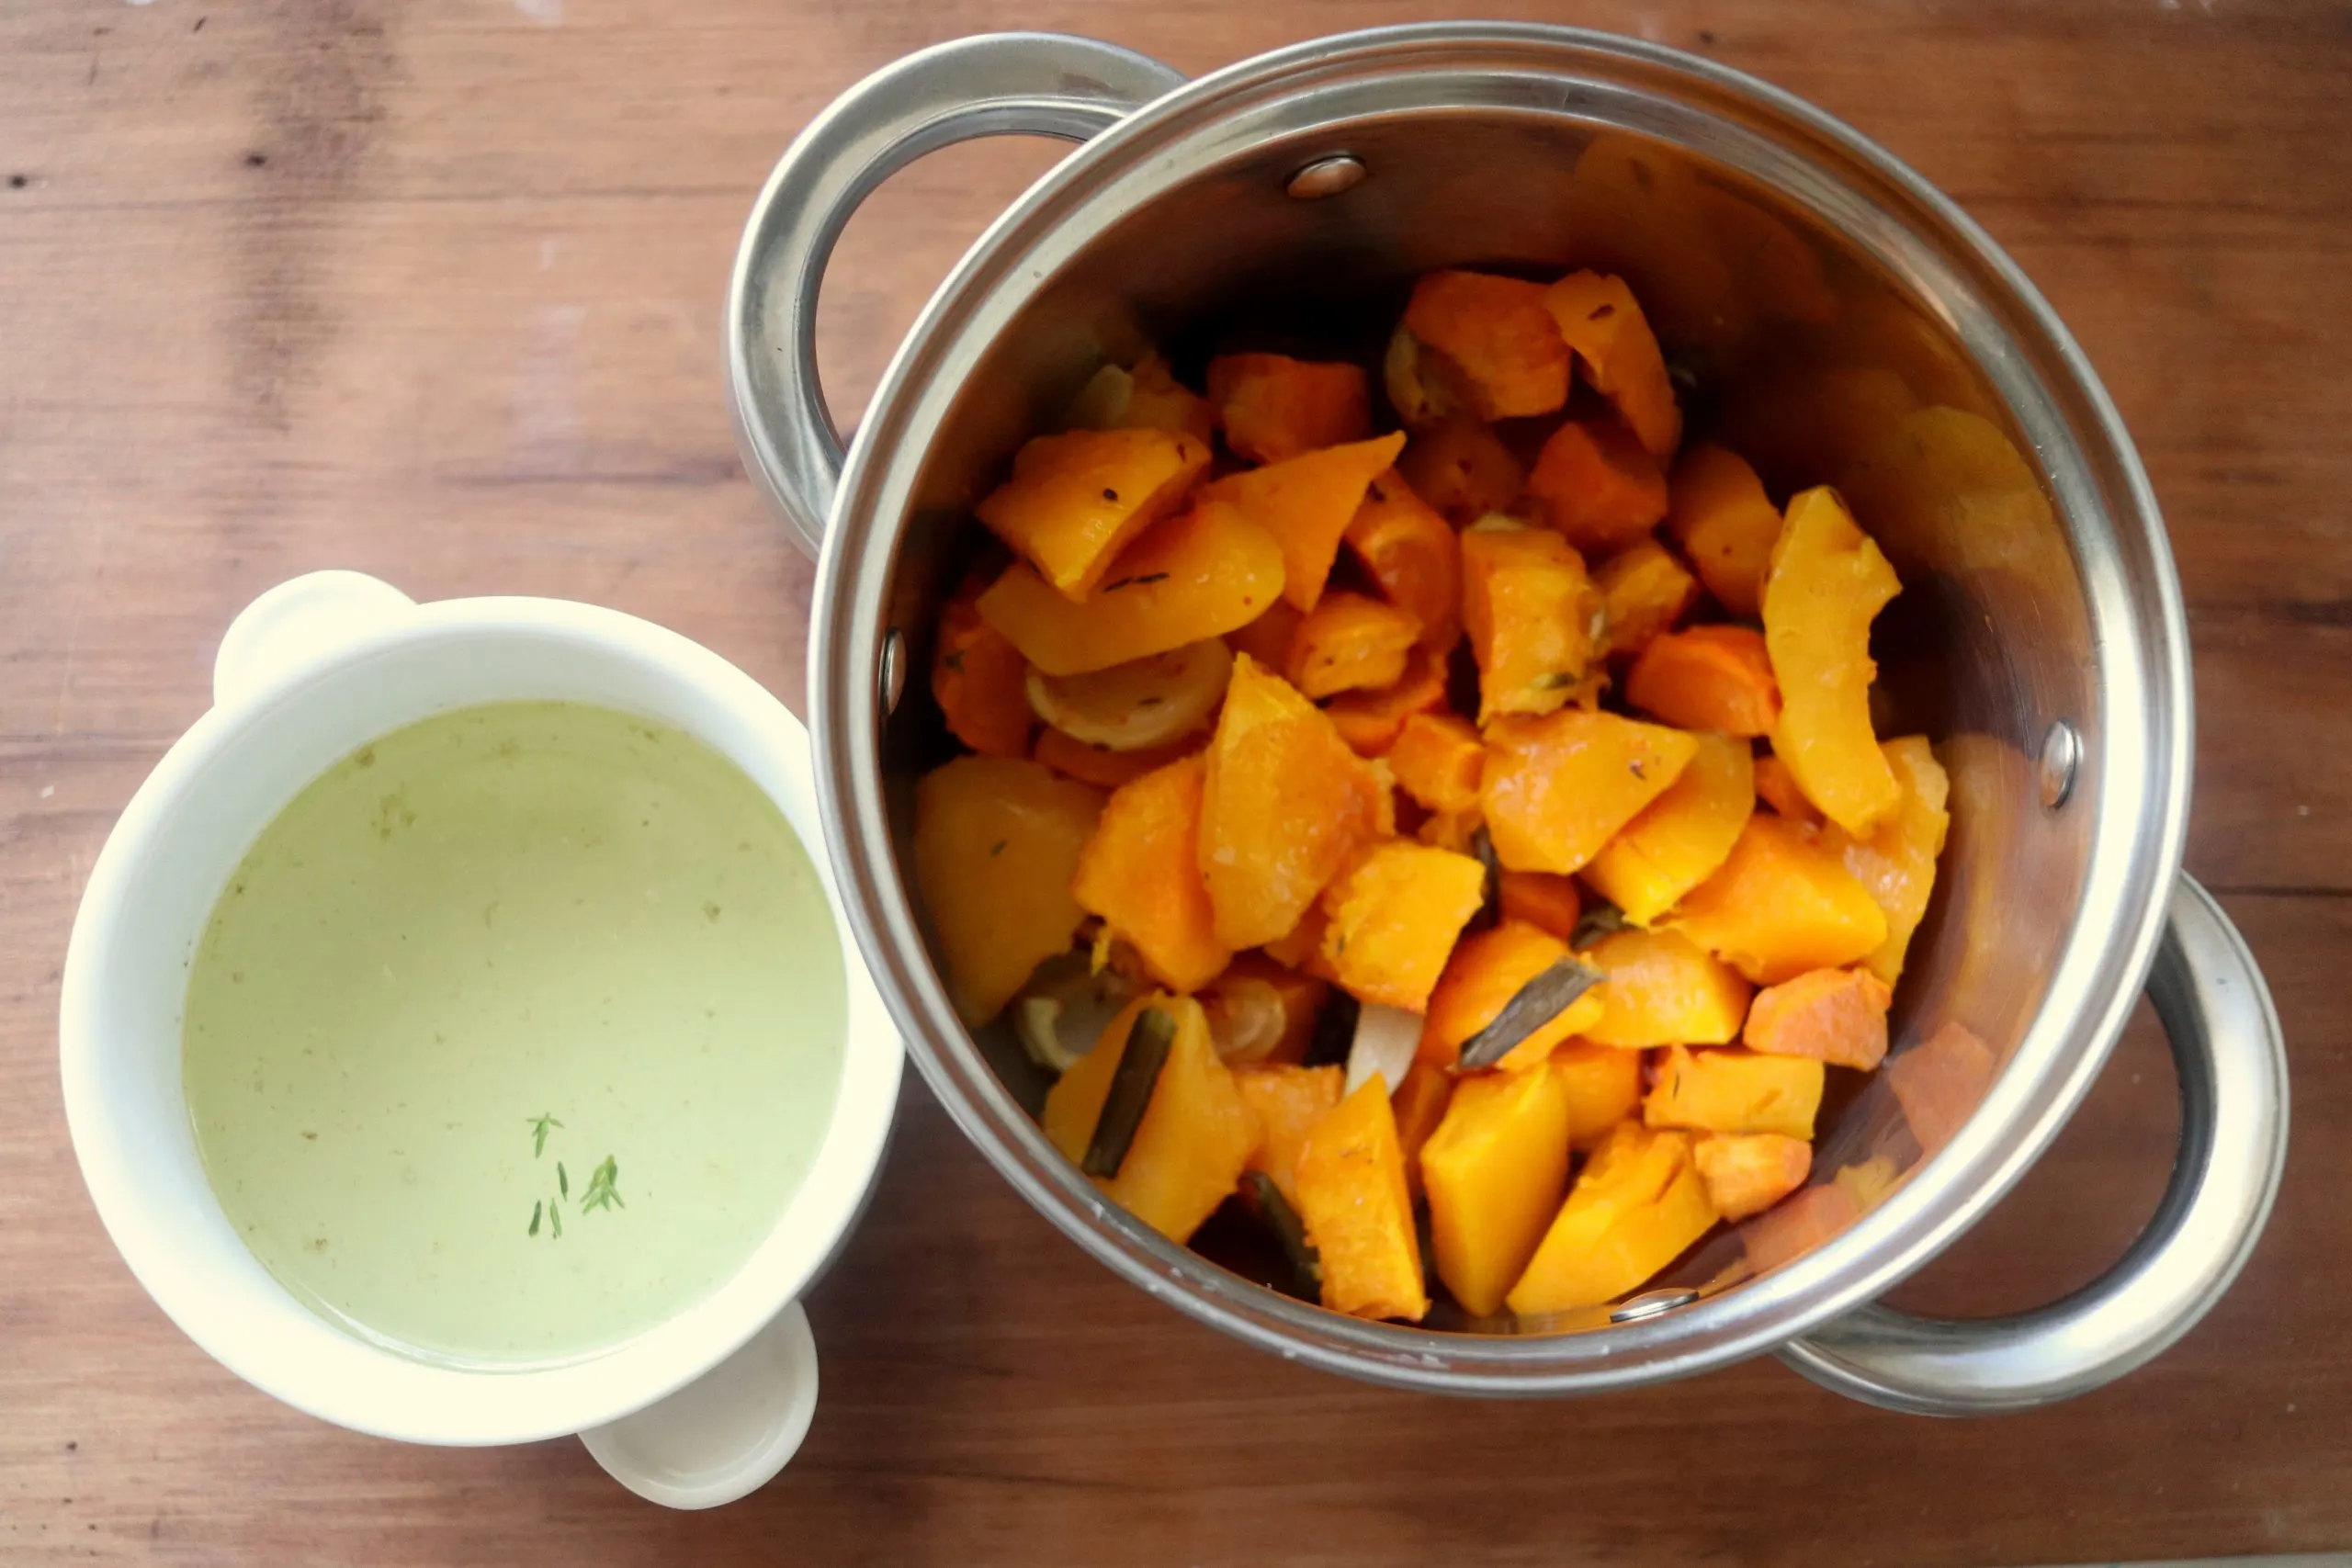 Top down photo of roasted squash and vegetables in a saucepan with a cup of broth on the side.